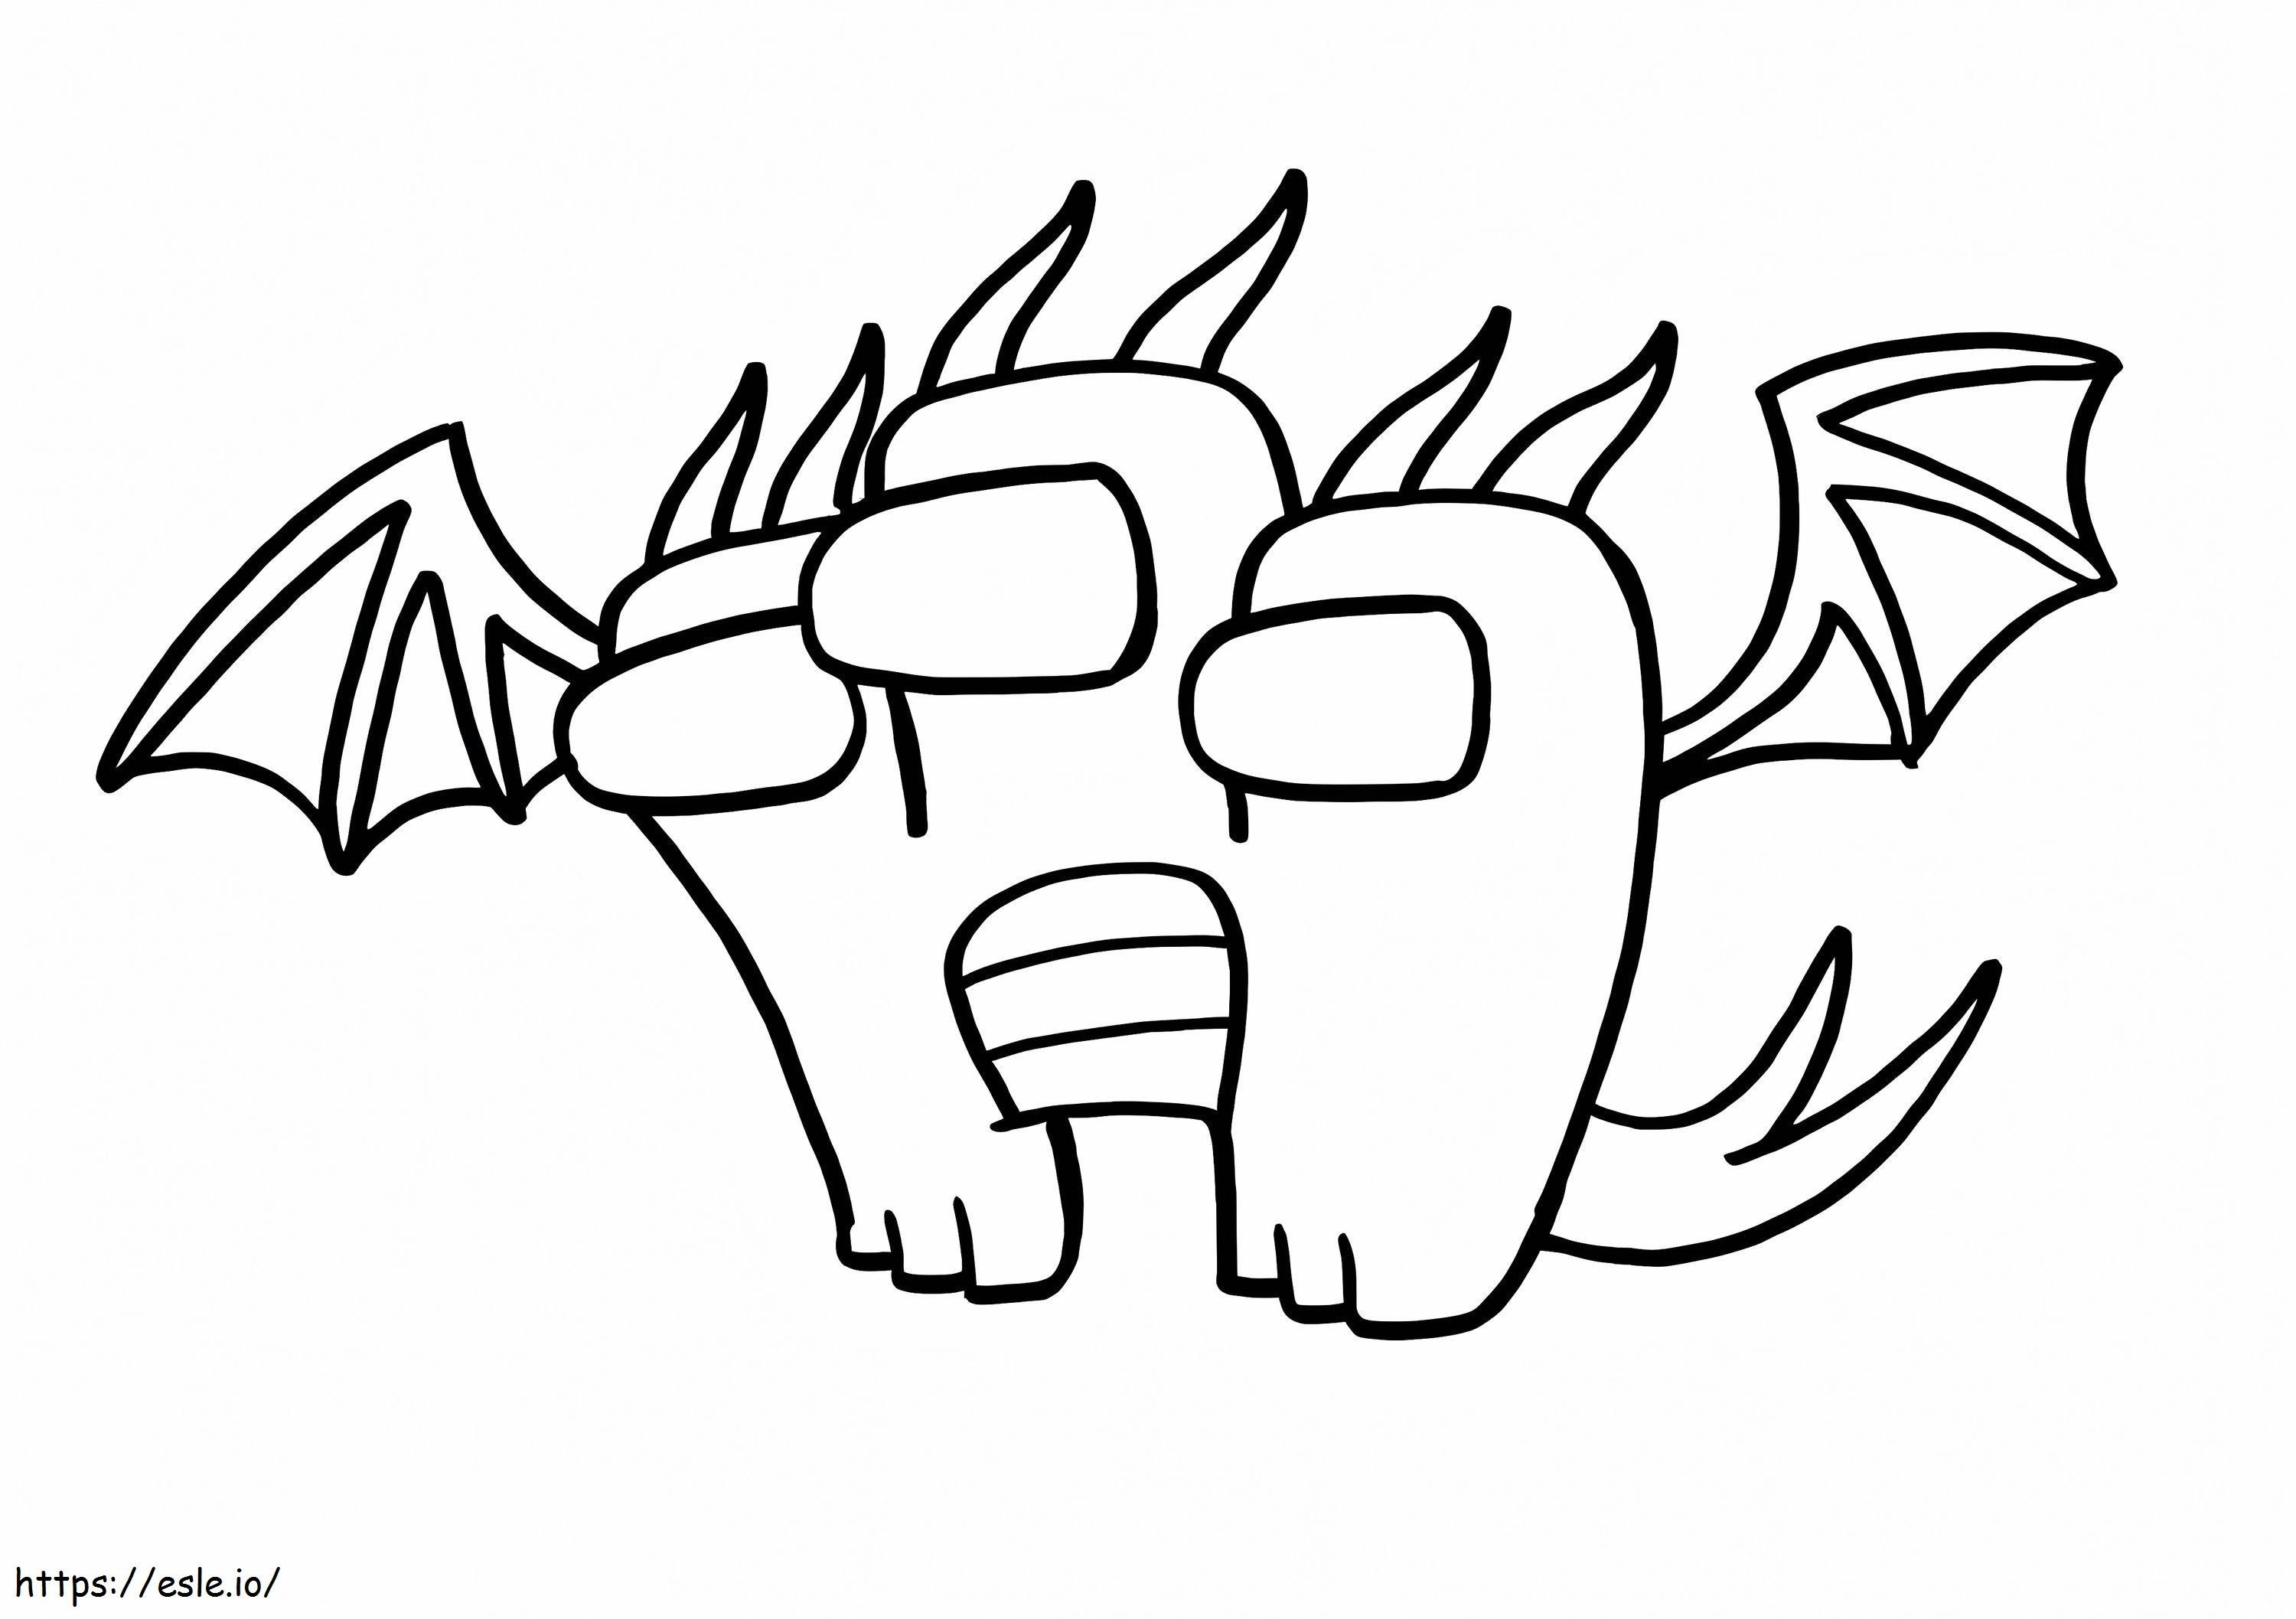 Among Us Ghidorah coloring page